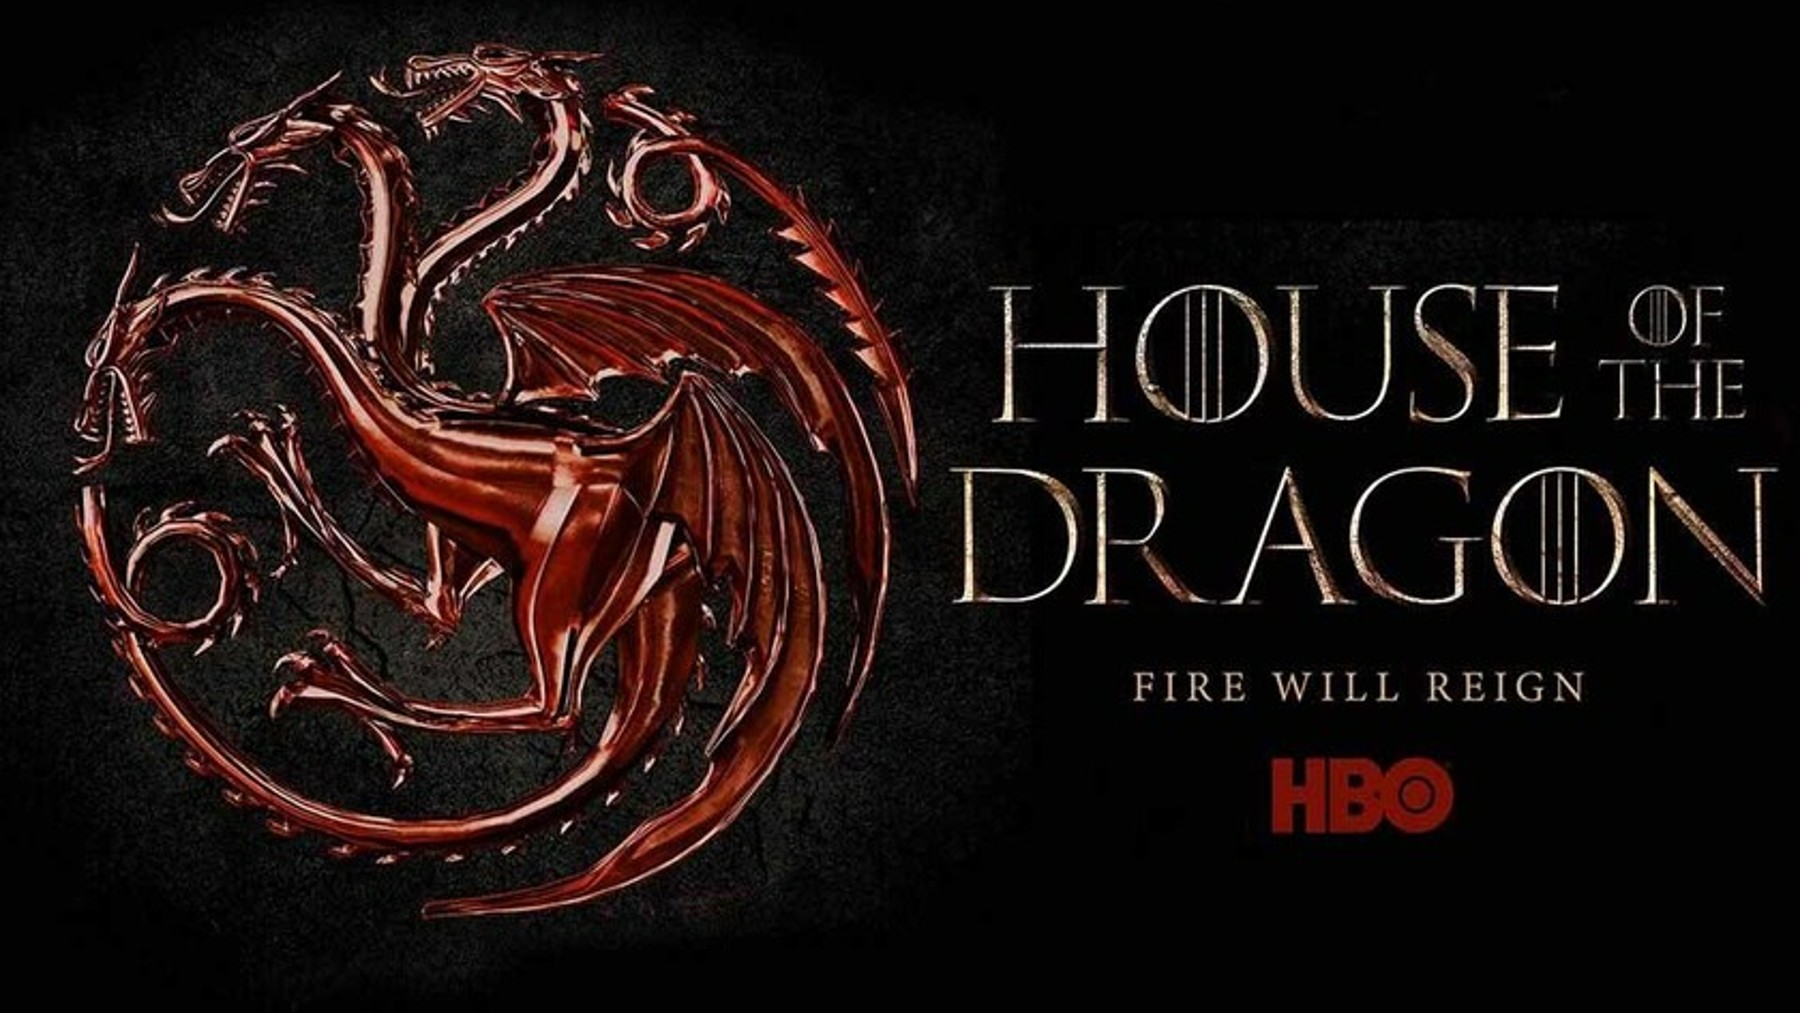 House of dragon llega a HBO